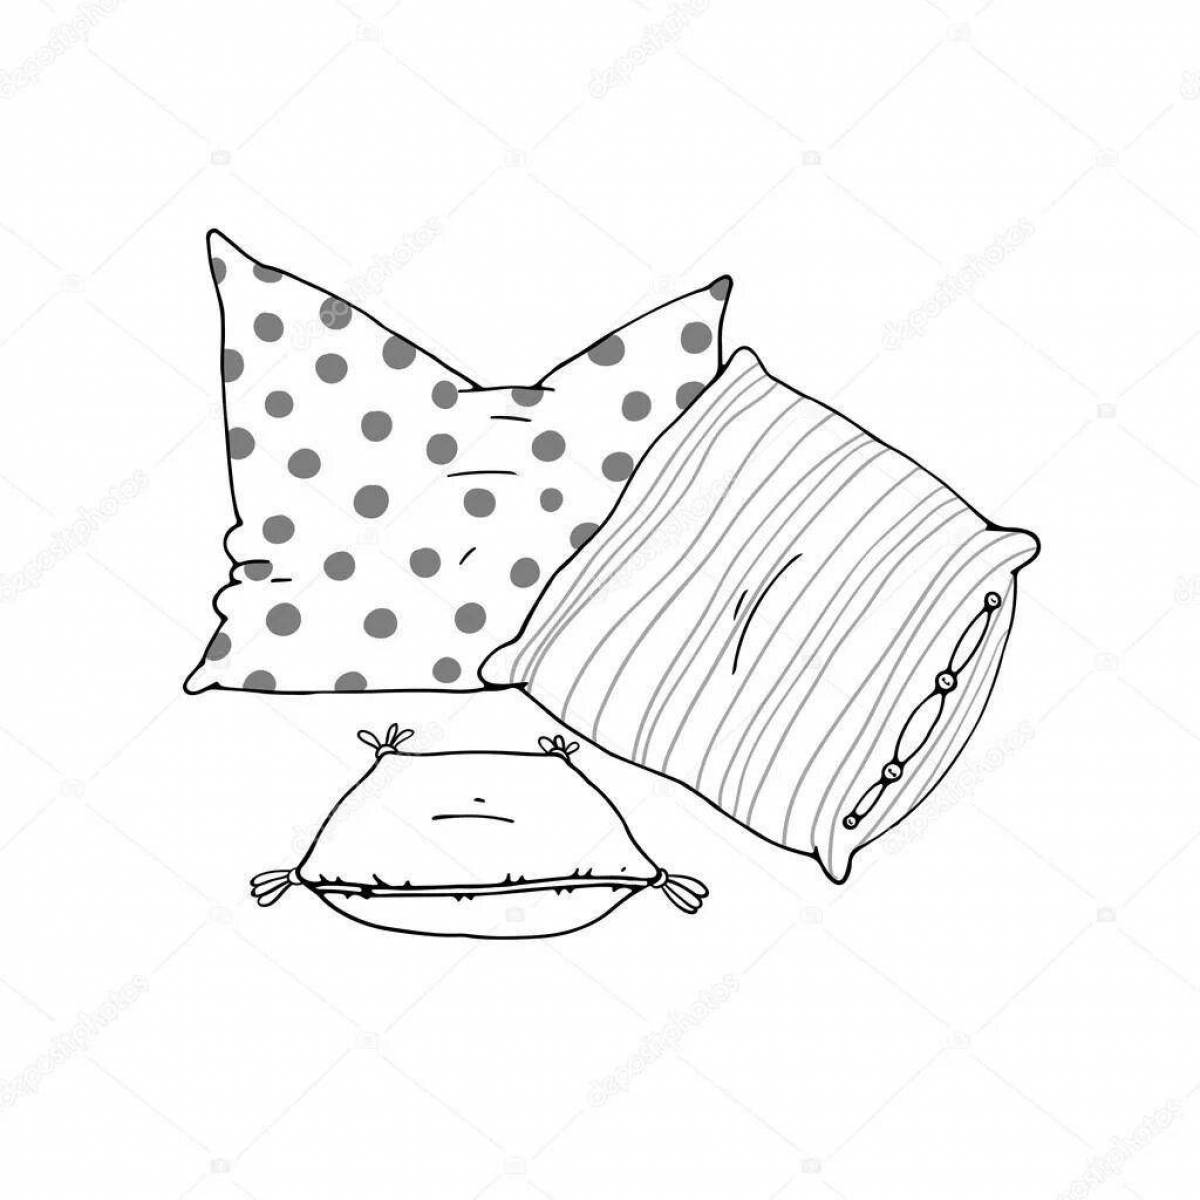 Duvet and pillow snuggly coloring page